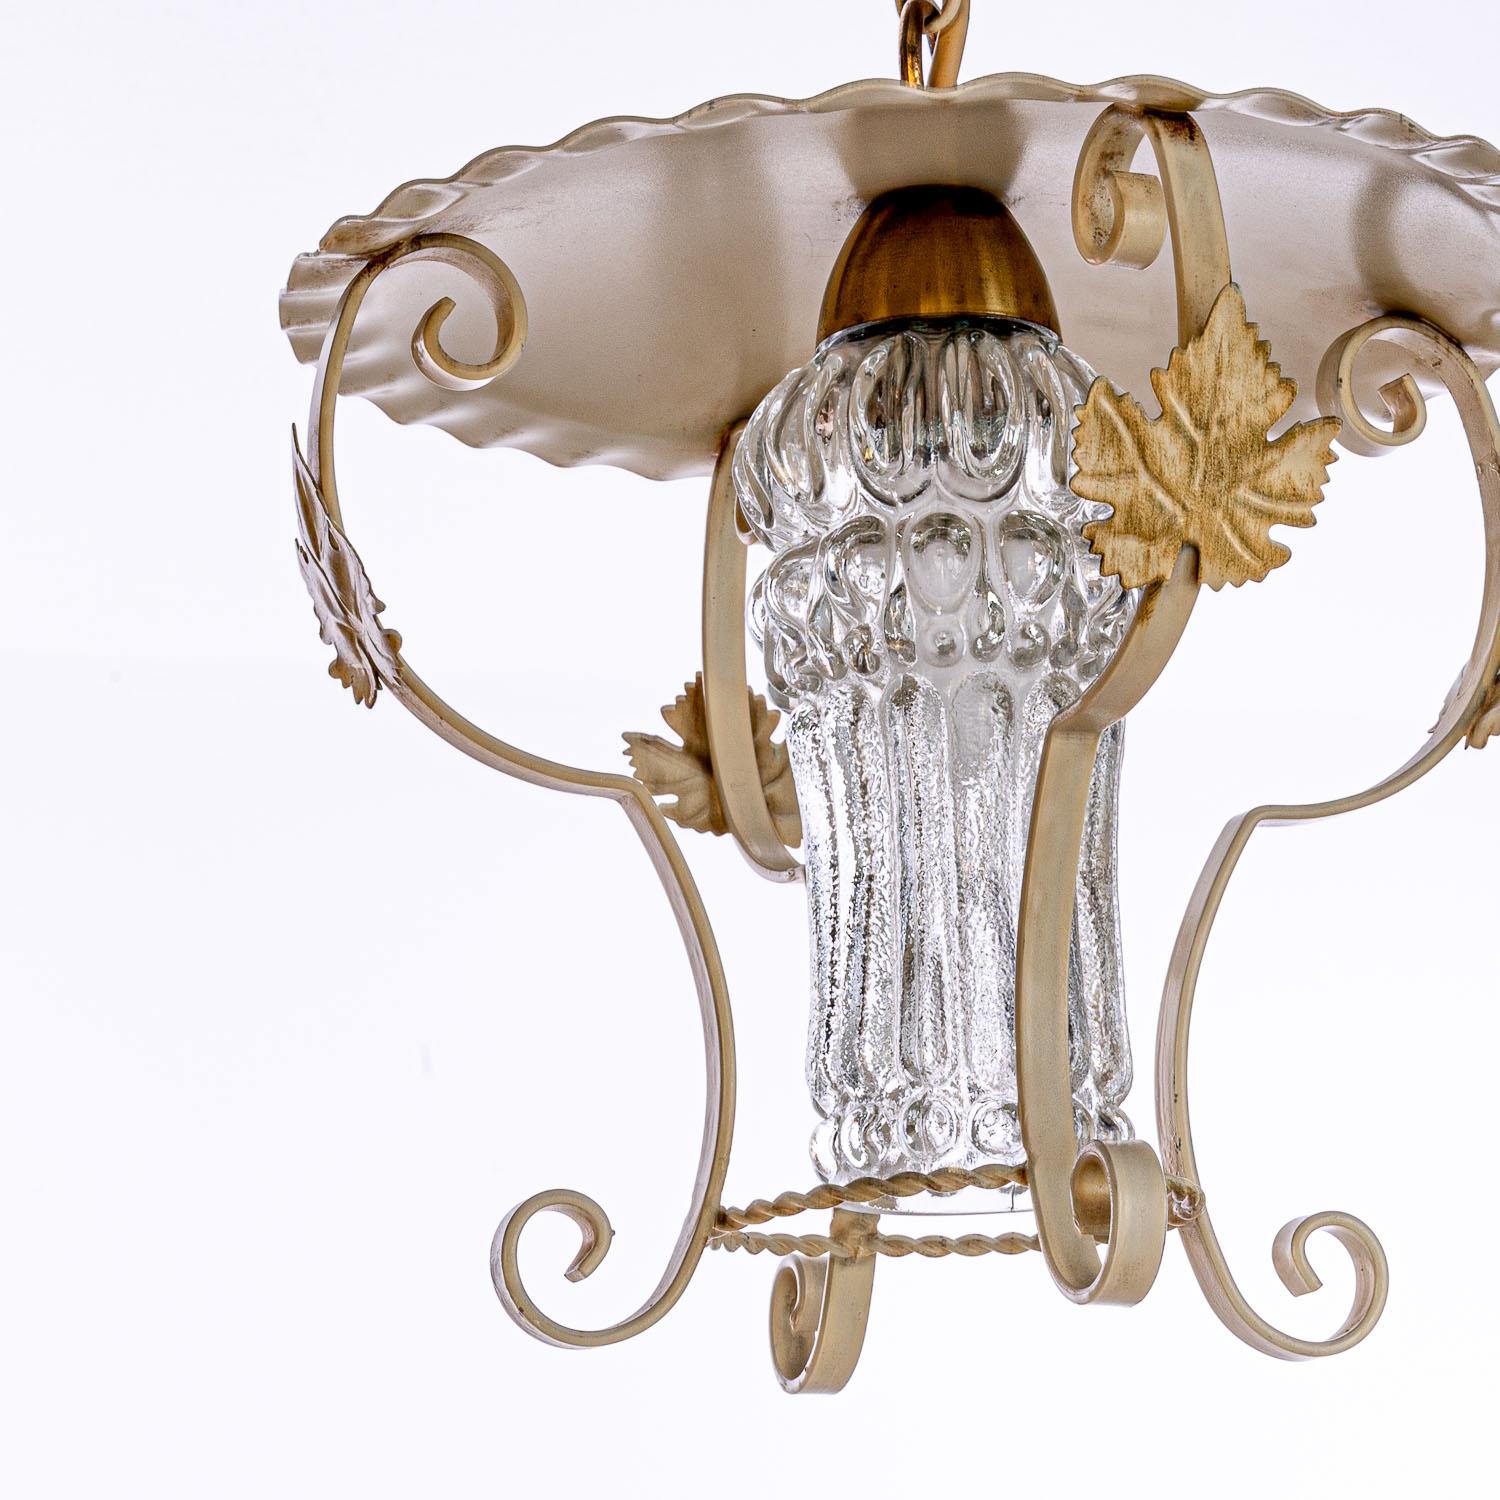 Lantern consists of thick glass ornament in the middle covering the E14 lightbulb, Finished off with a metal frame.